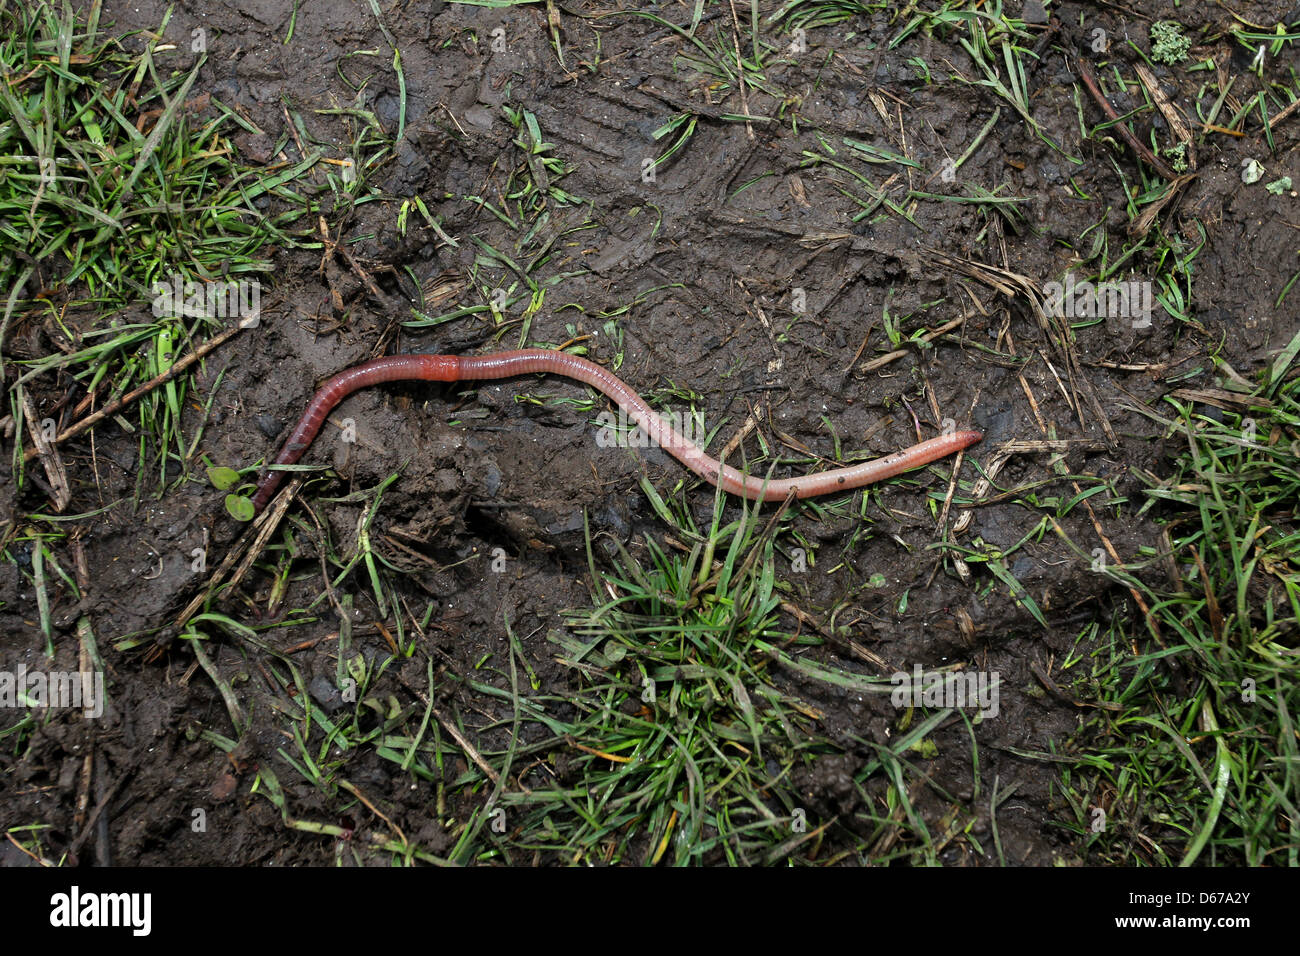 A big worm in the wet, trodden earth, soil and grass of Preston Park, Brighton, East Sussex, UK. Stock Photo